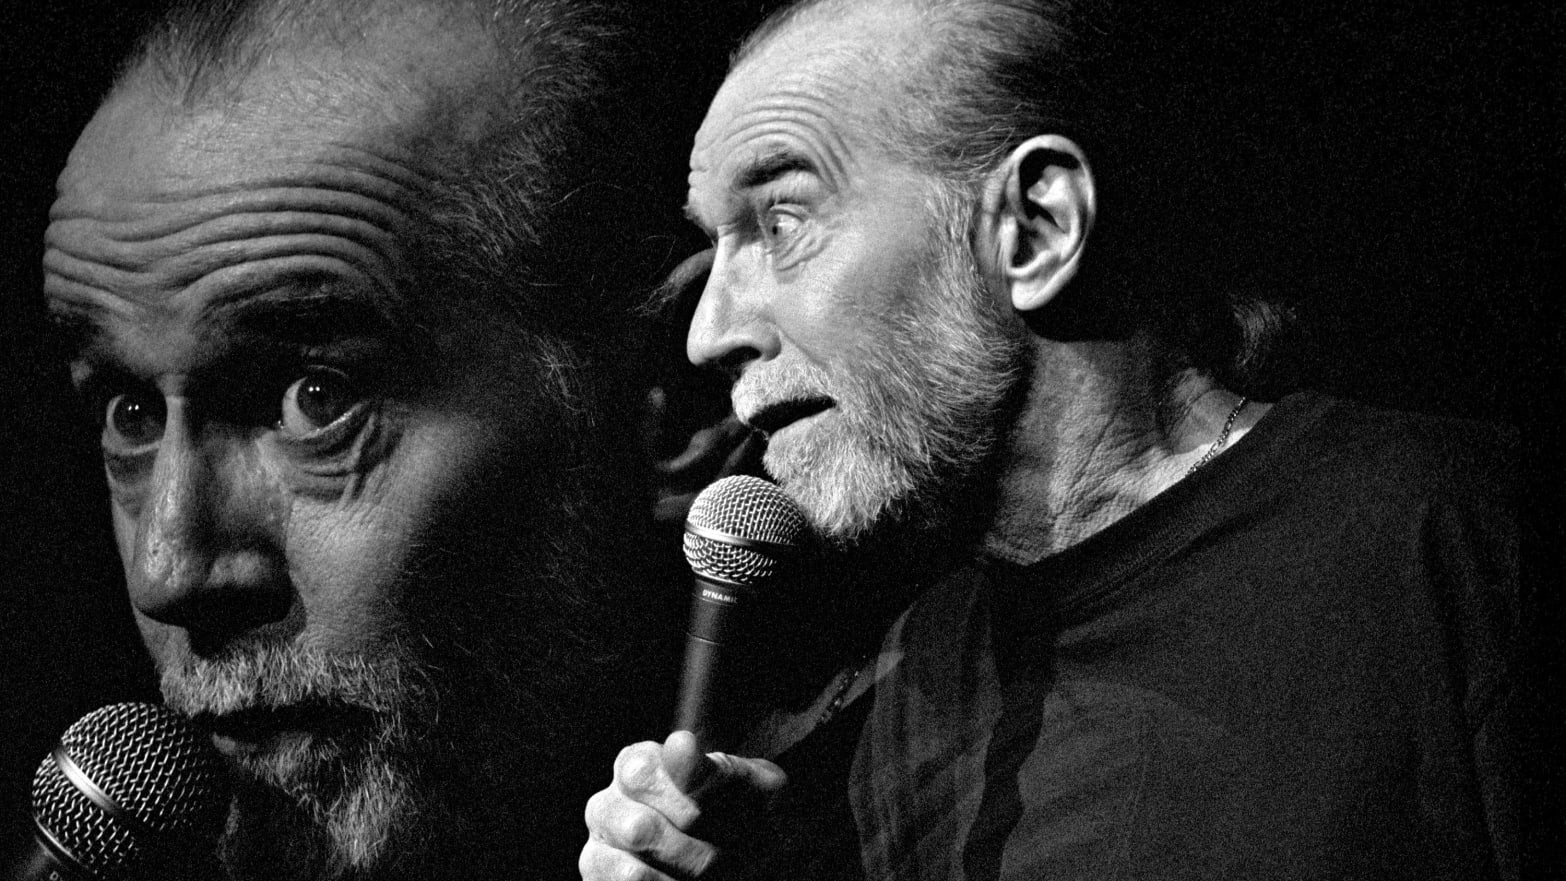 George Carlin performs a standup routine at the Cheyenne Civic Center.